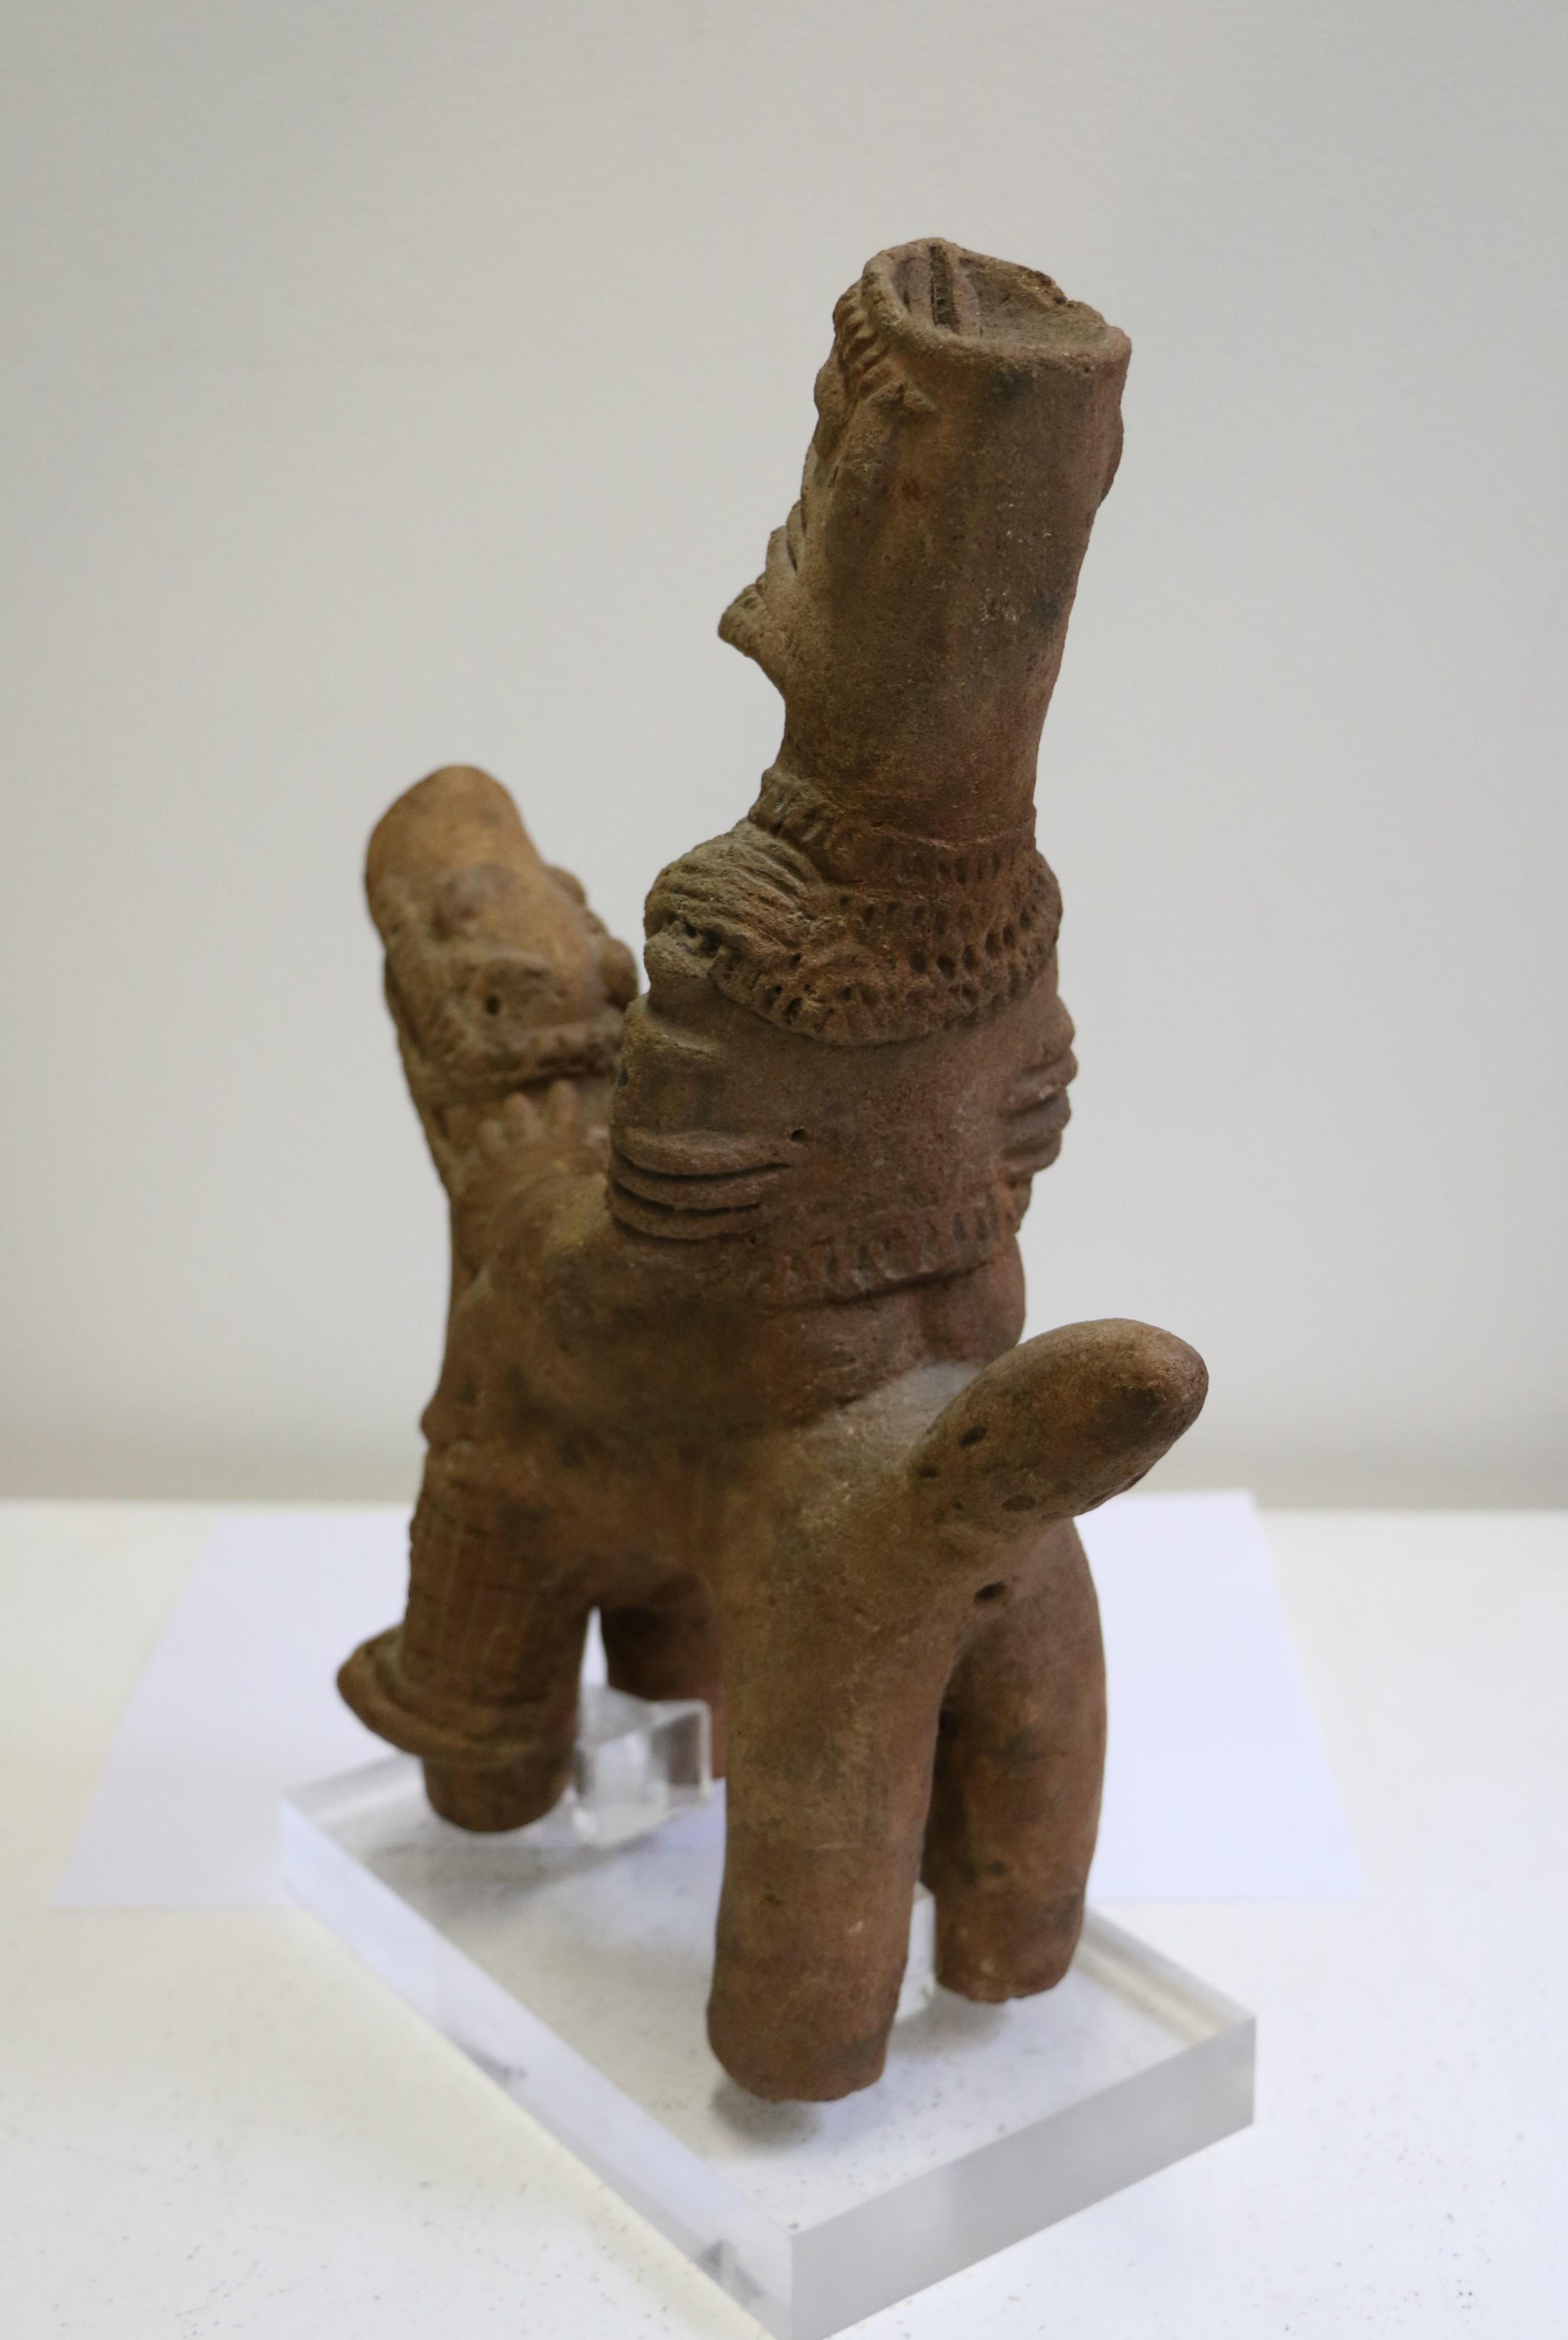 African Terracotta Equestrian Sculpture, Ghana, 14-15th AD Century For Sale 1